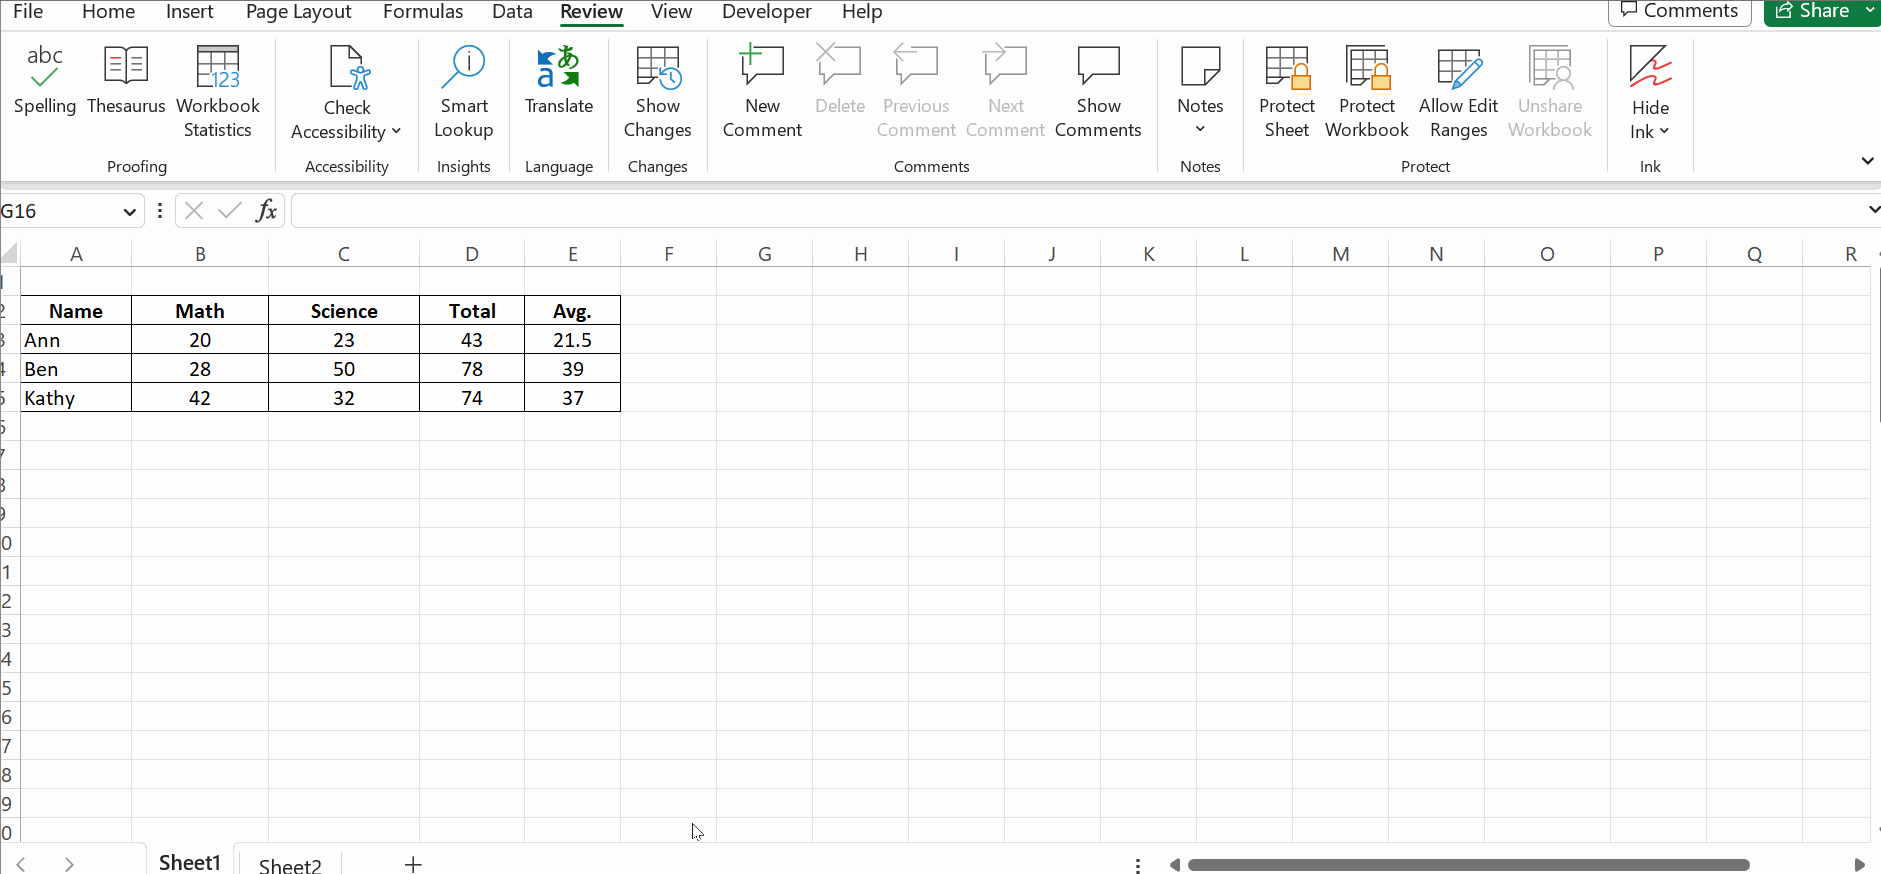 How To Lock the Entire Worksheet in Excel